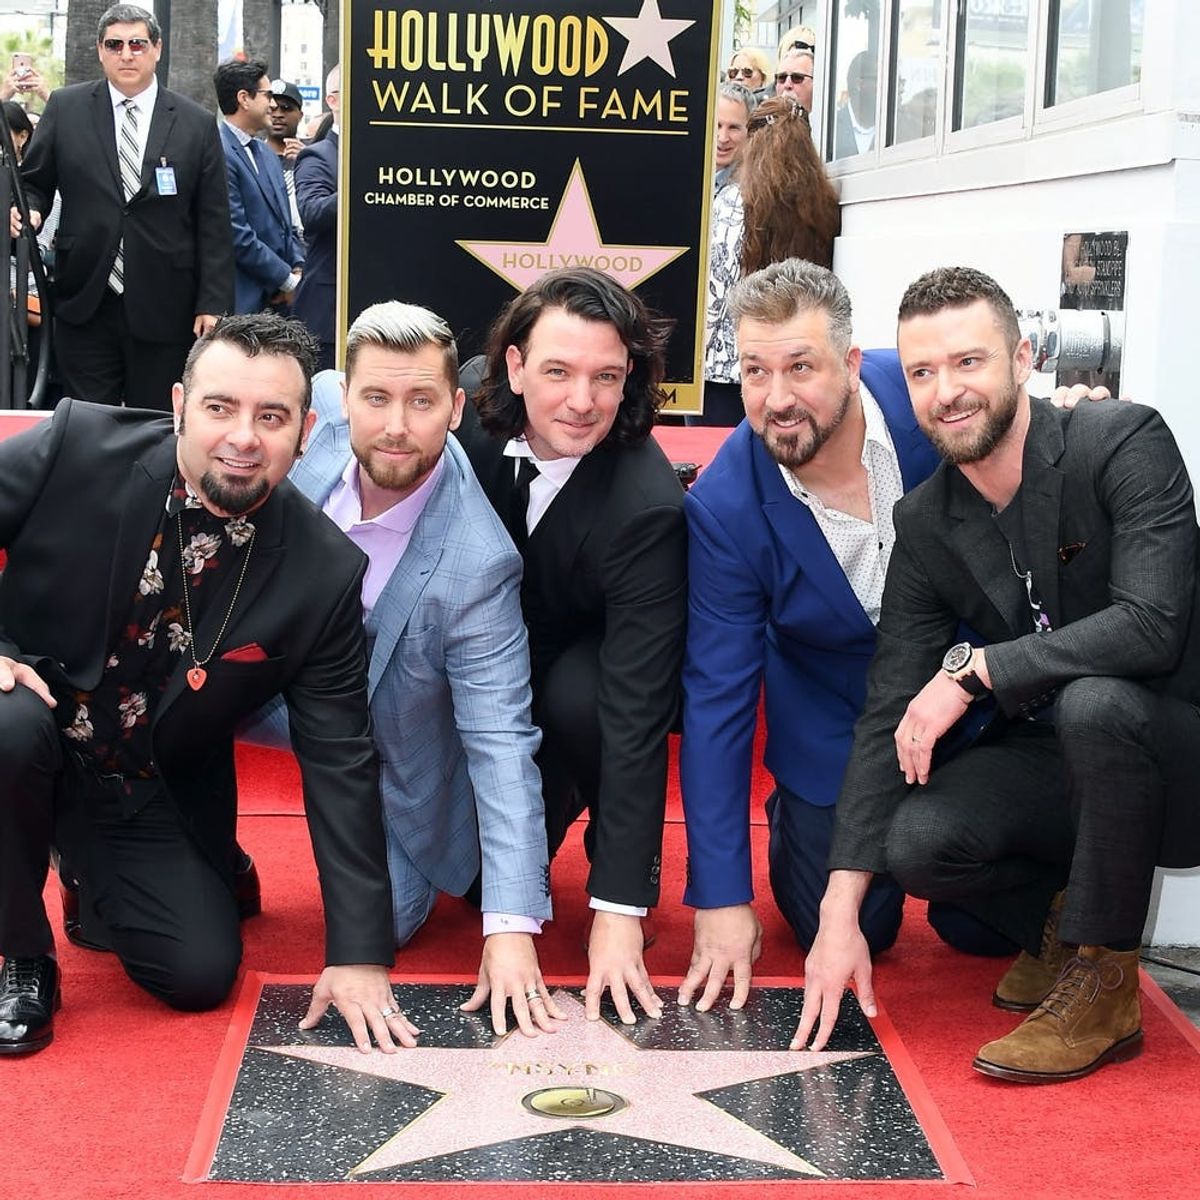 *NSYNC Reunited to Celebrate Their Hollywood Walk of Fame Star — See the Pics!